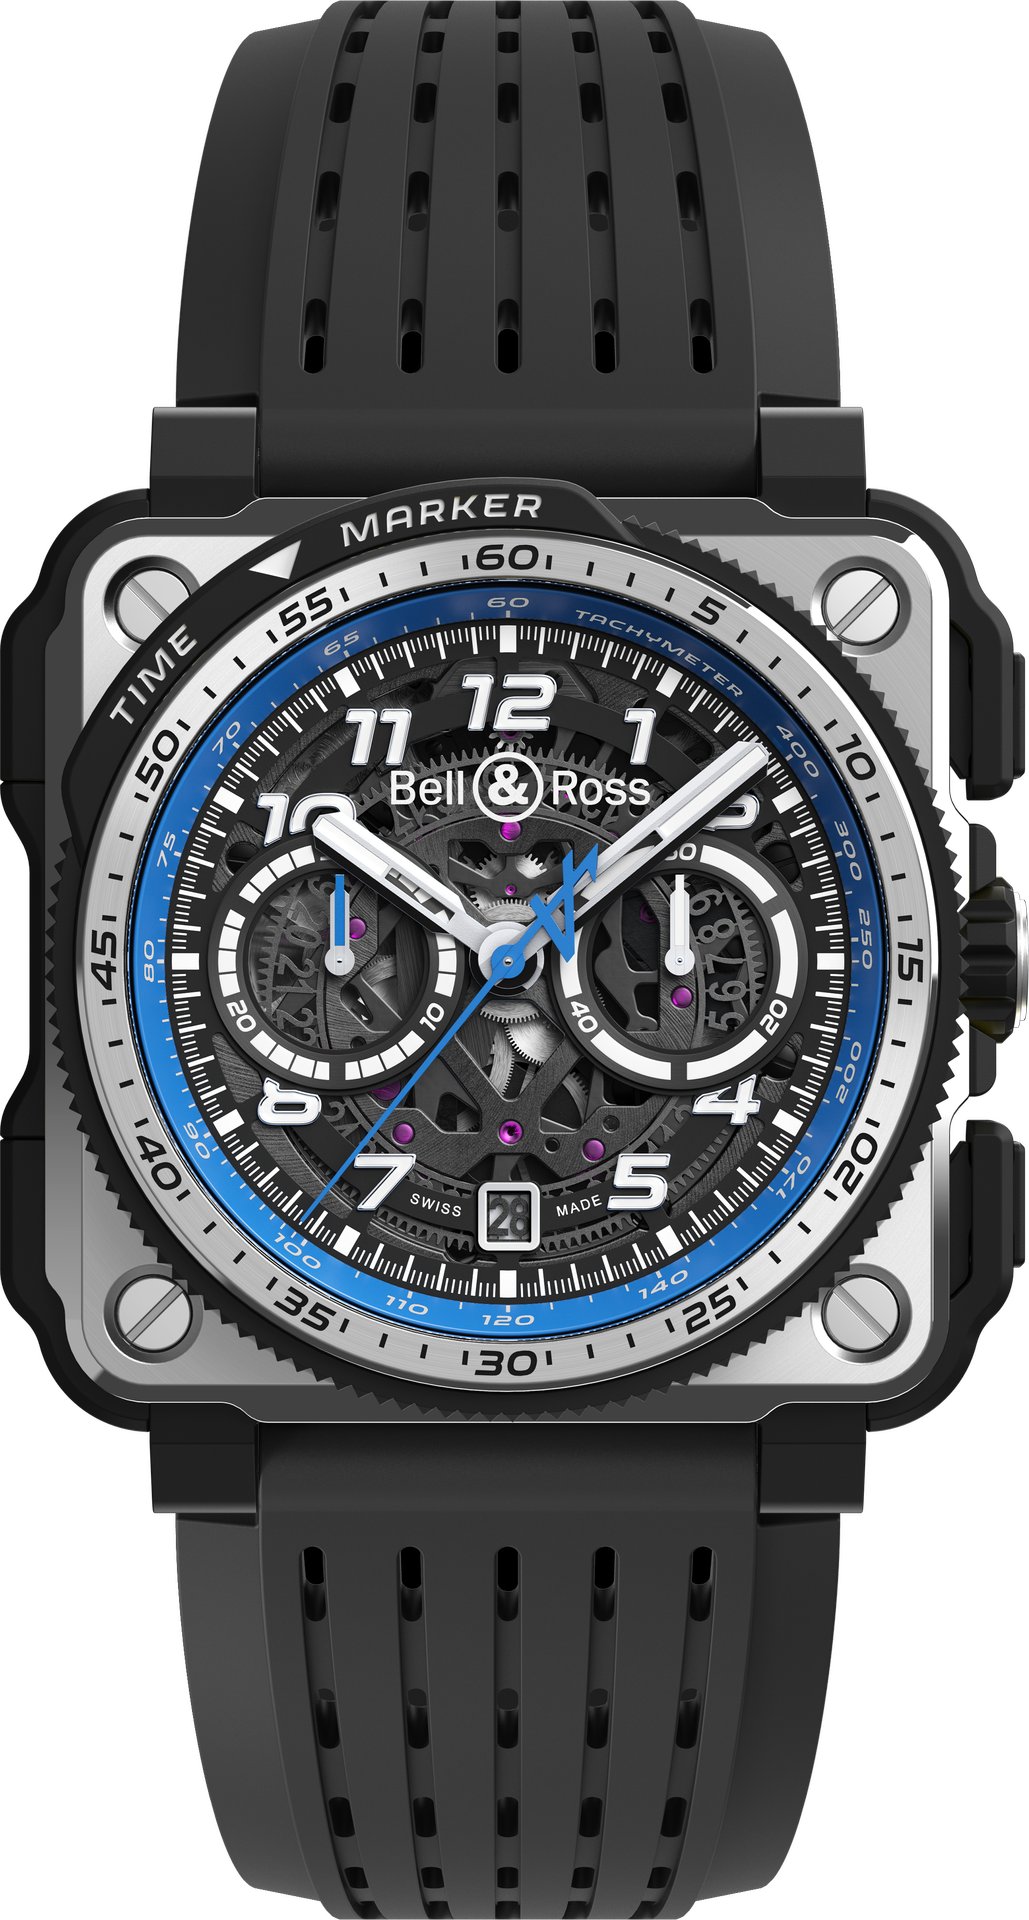 Bell & Ross Alpine F1 Team Collection Watch I Love